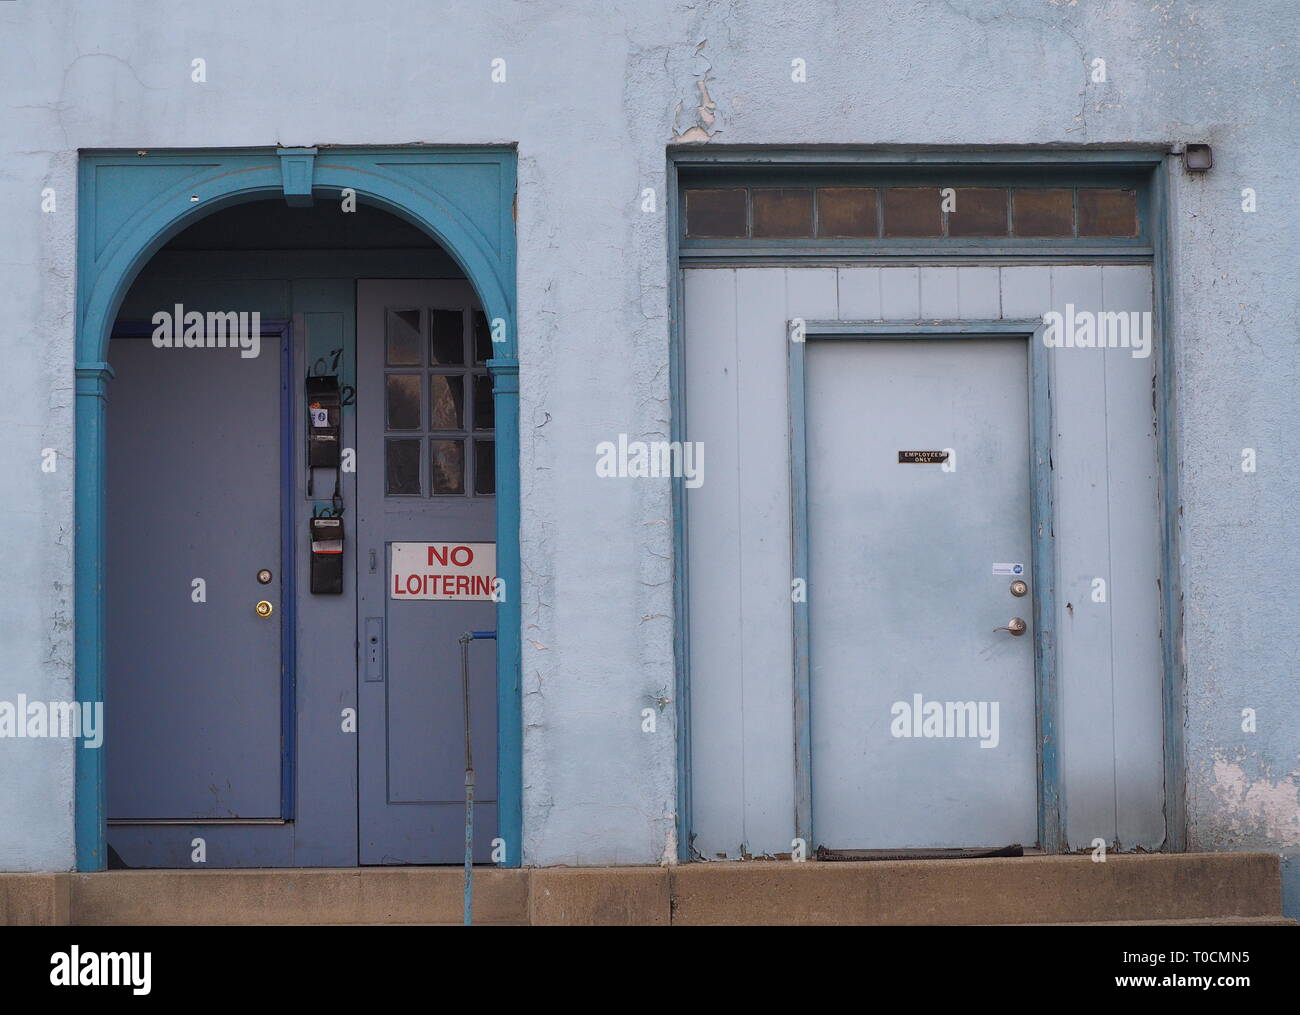 No loitering sign on door blue and slate wall Stock Photo